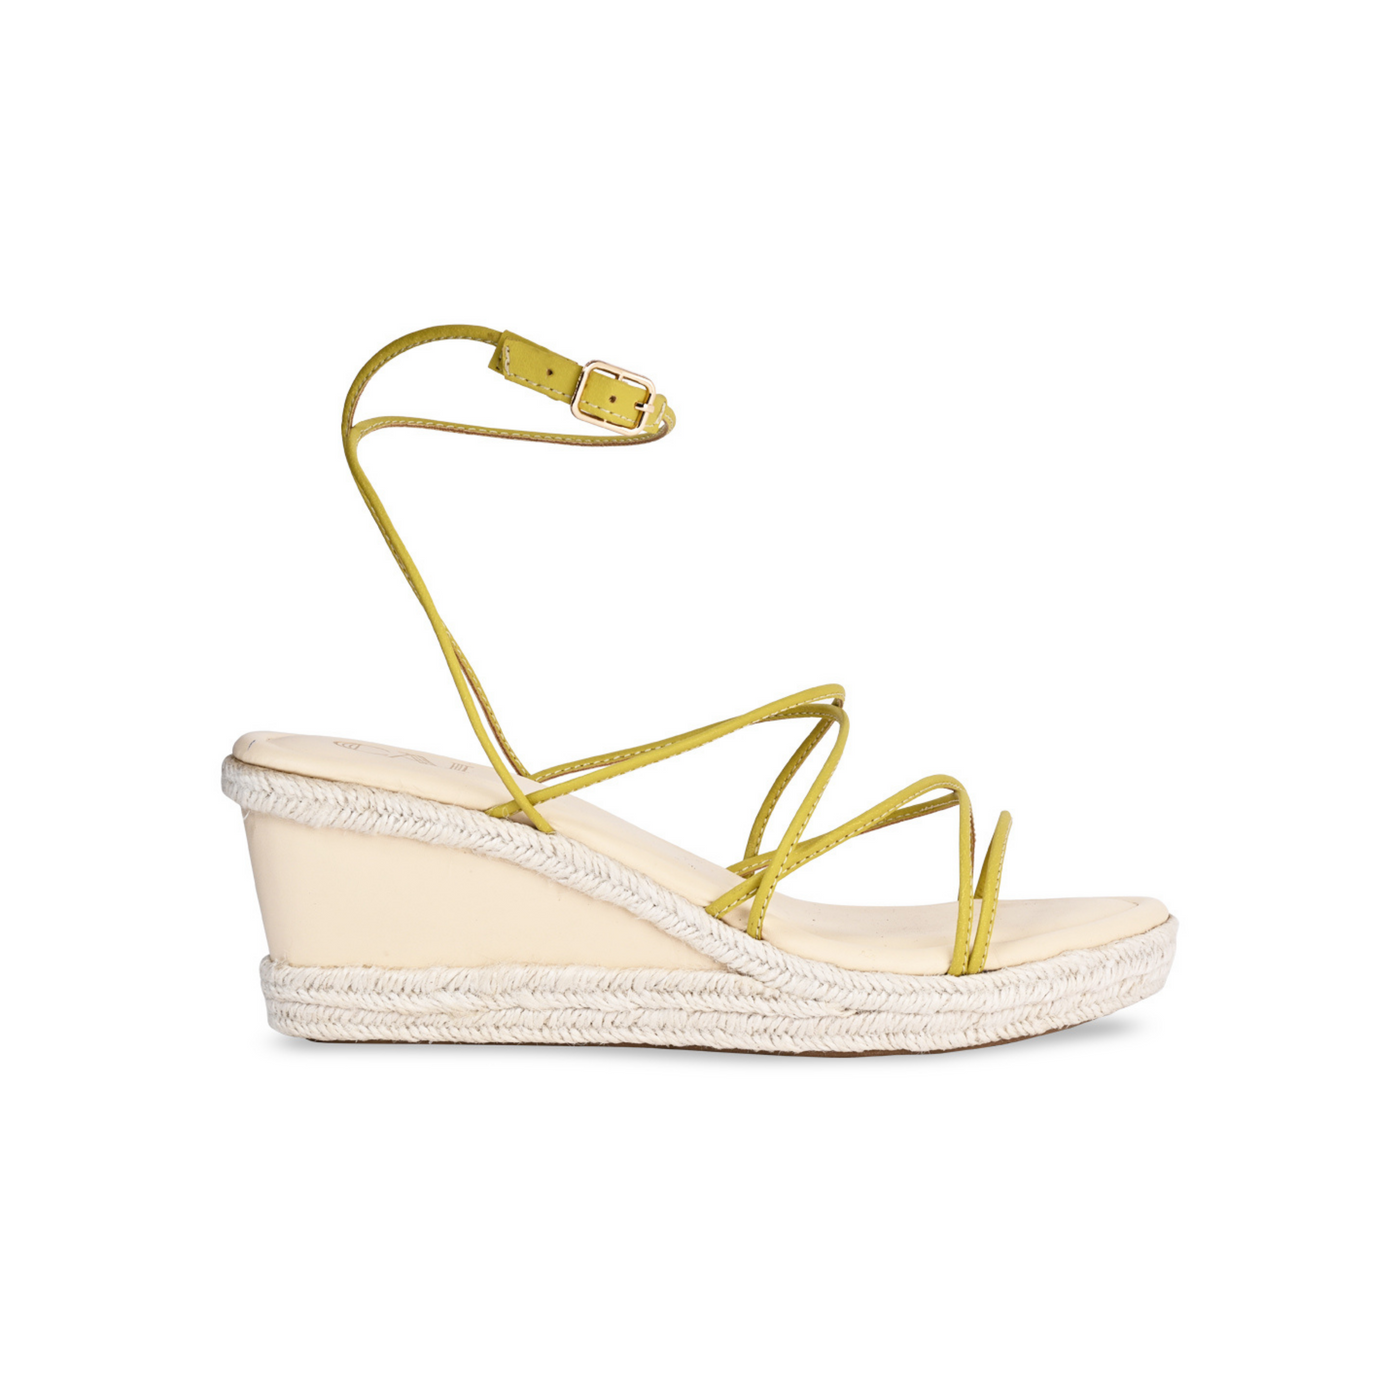 Sandy Toes Strap Wedge